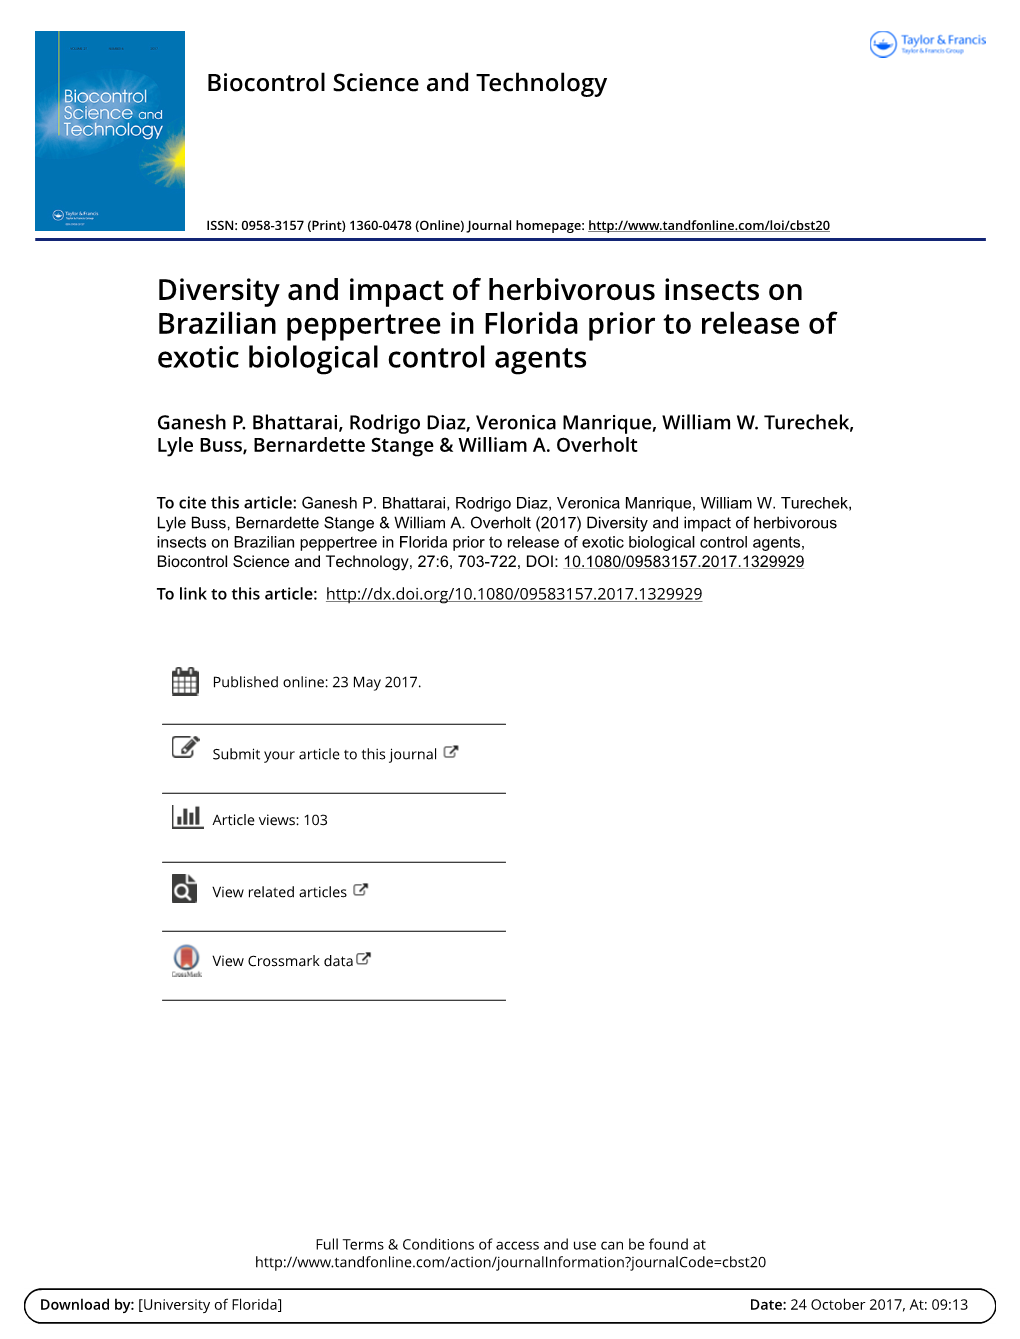 Diversity and Impact of Herbivorous Insects on Brazilian Peppertree in Florida Prior to Release of Exotic Biological Control Agents